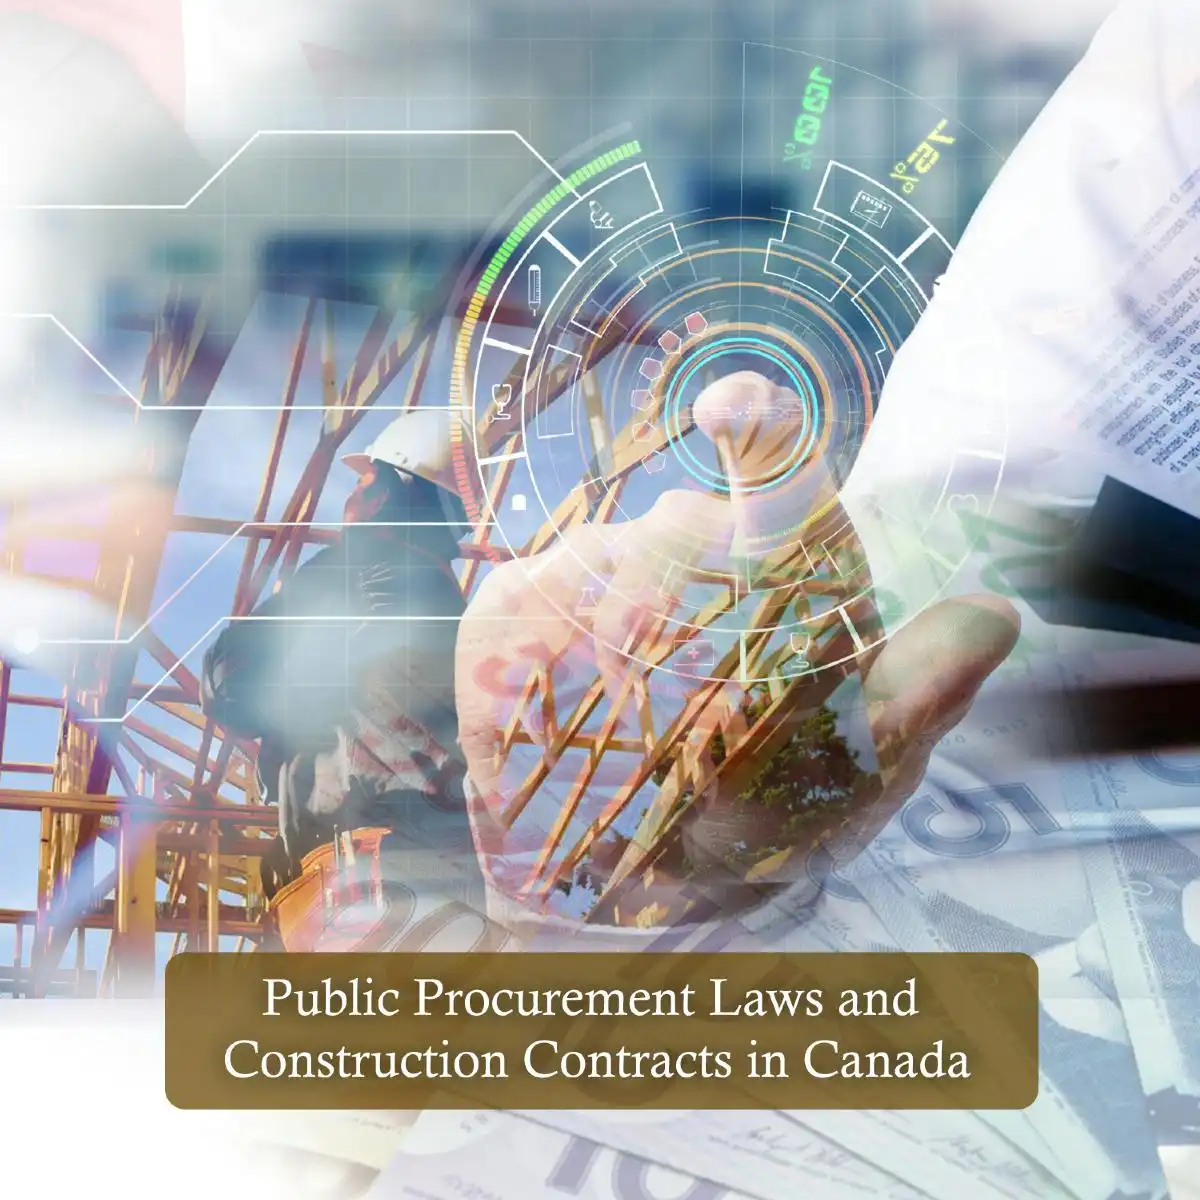 Public-Private Partnerships (P3) in Canadian Construction: Opportunities and Challenges